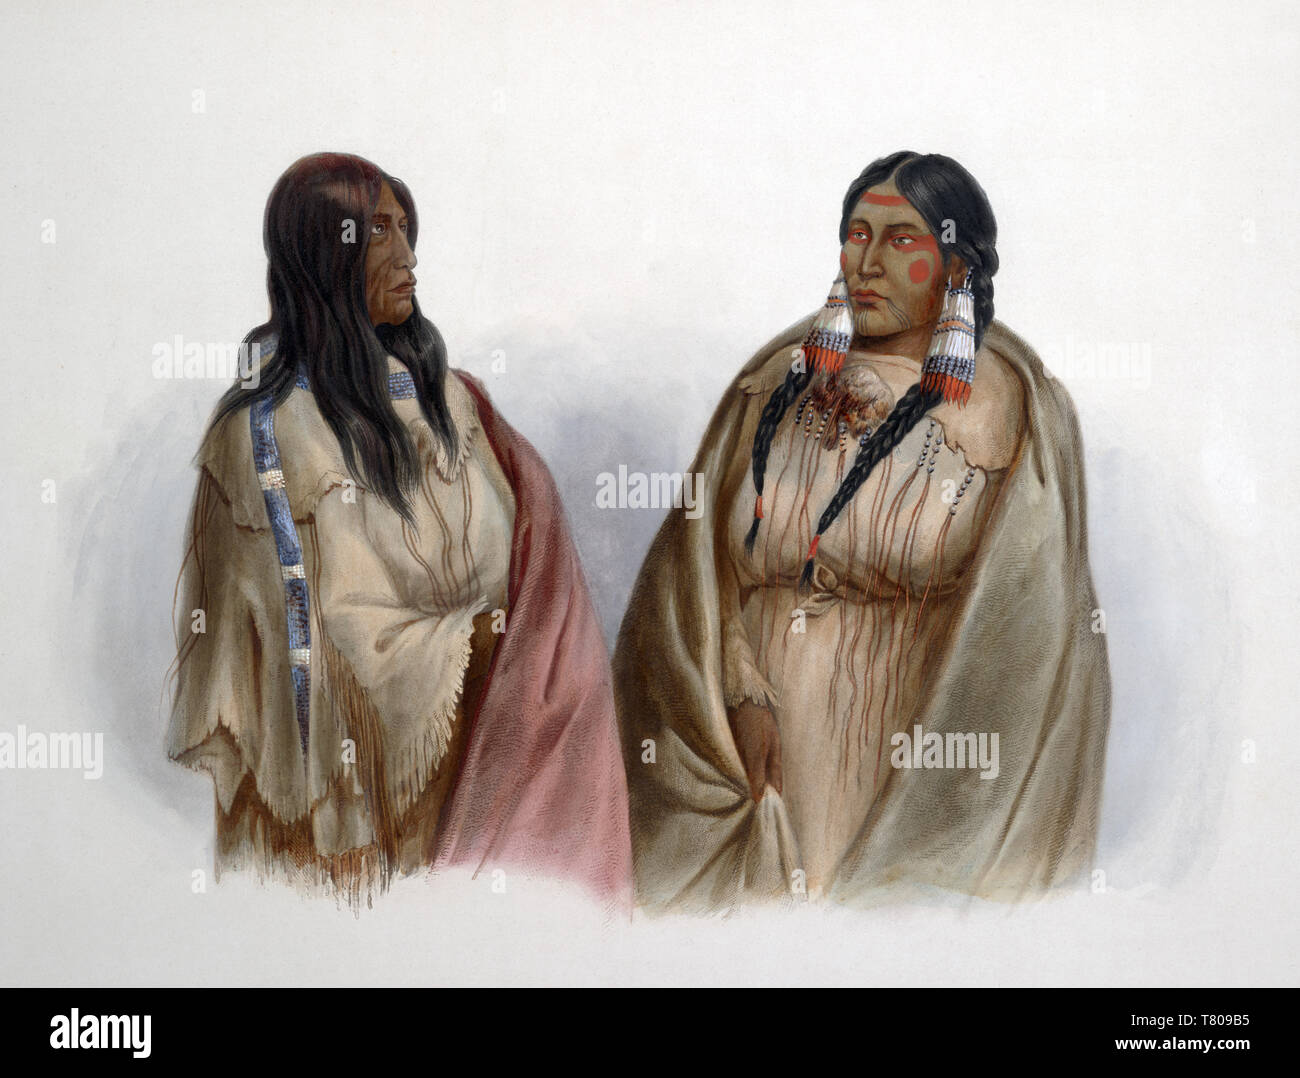 Native American Snake and Cree Women, 1830s Stock Photo